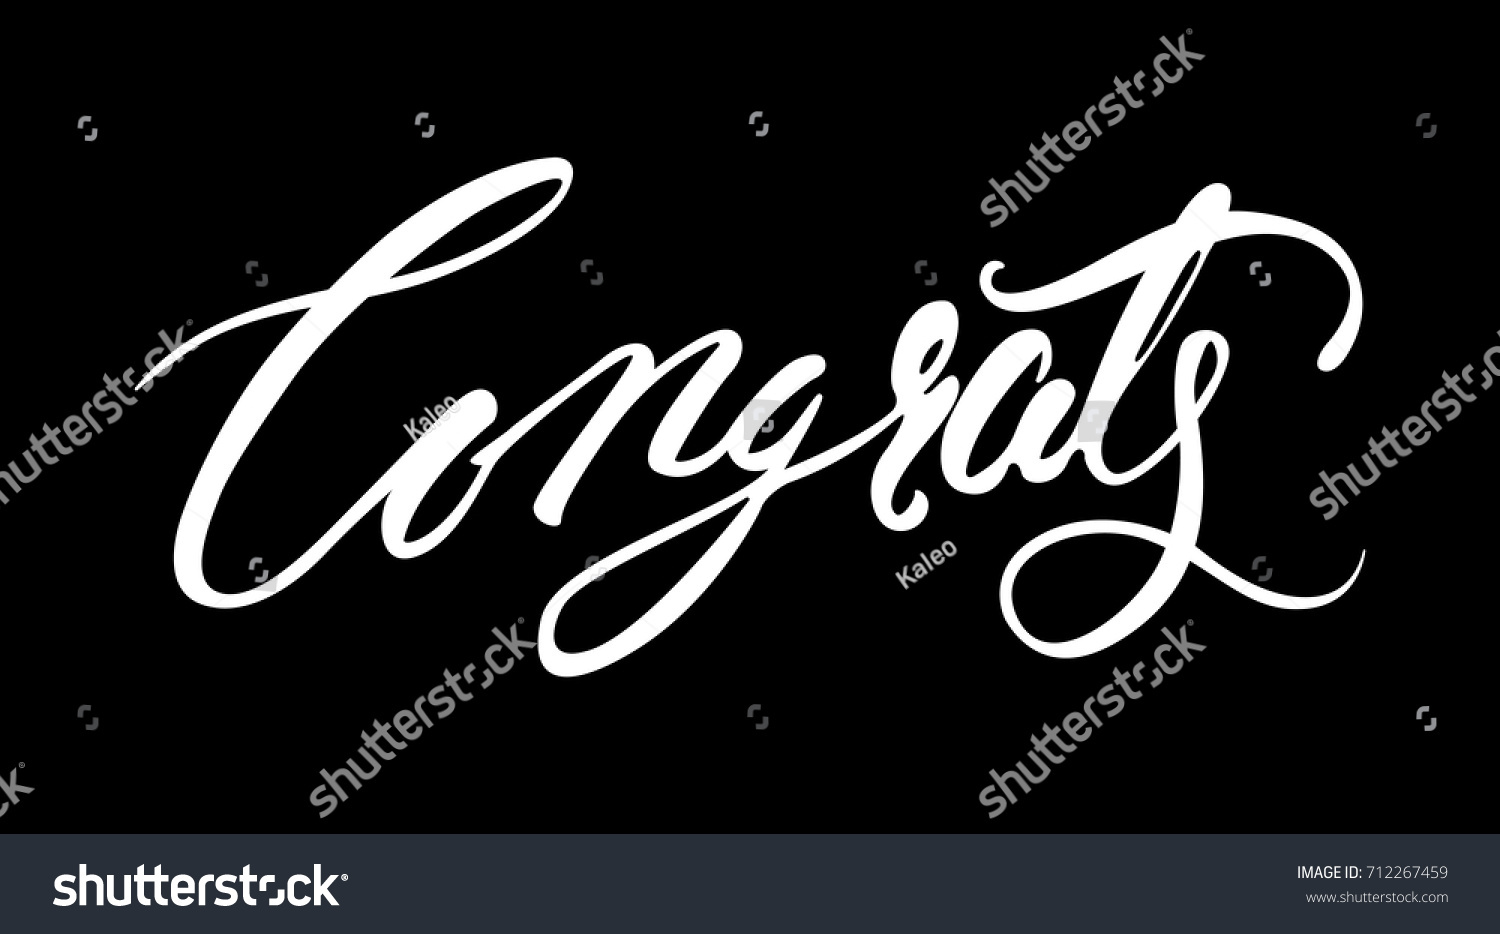 Congrats hand written lettering for cards, invitation, poster and print. Modern brush calligraphy of Congrats. Isolated on White. #712267459